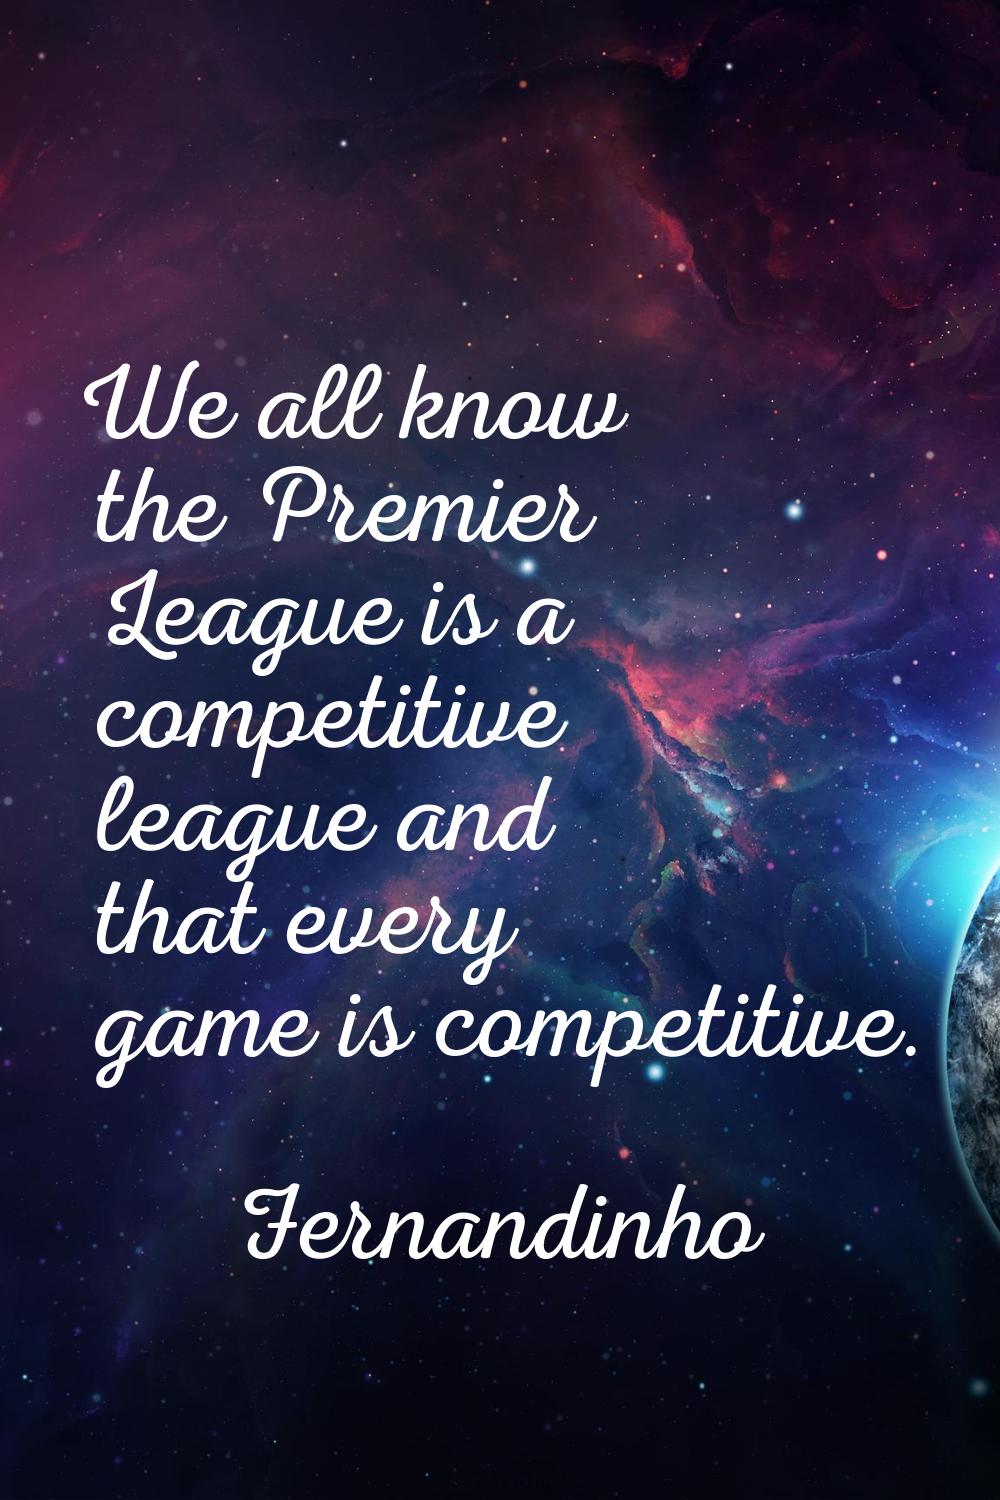 We all know the Premier League is a competitive league and that every game is competitive.